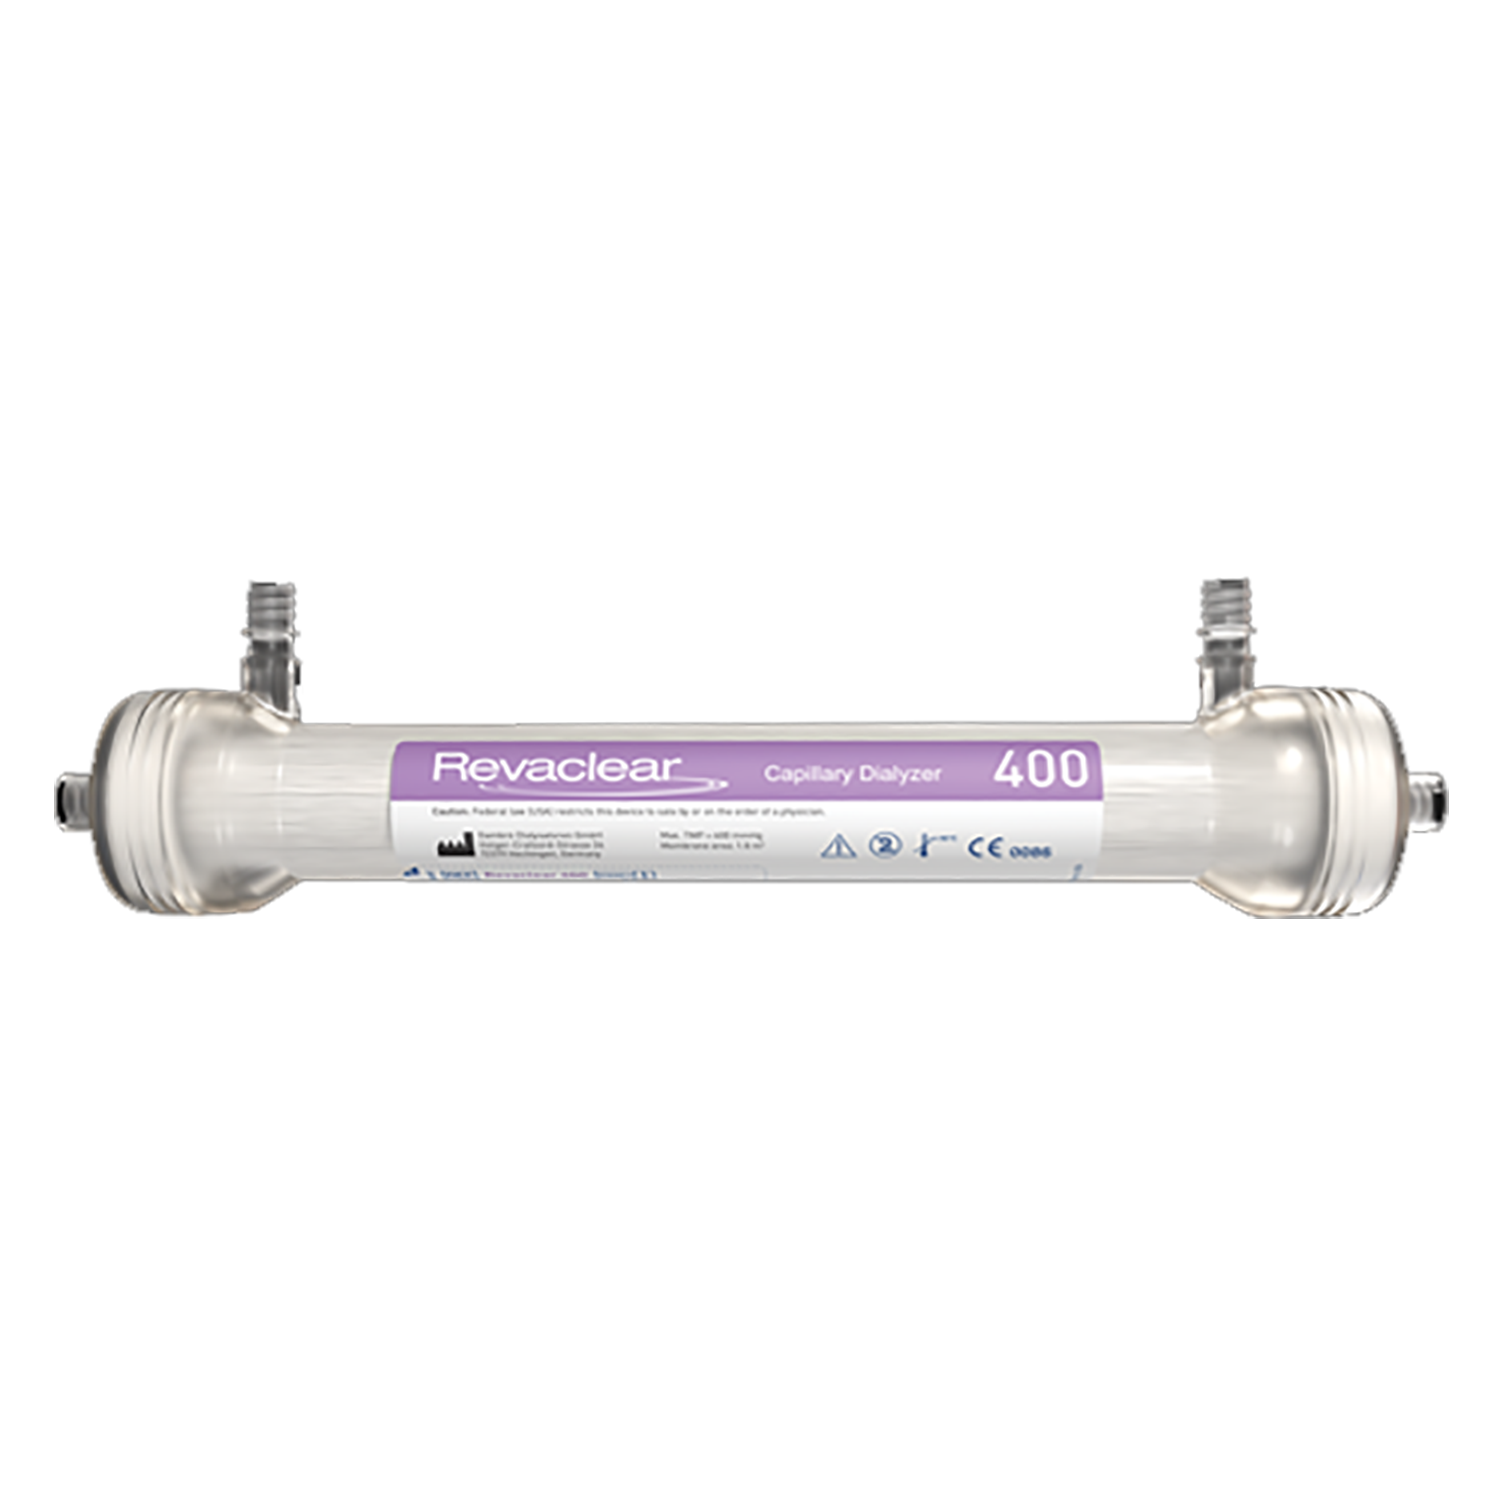 Baxter Revaclear 400 Capillary Dialyzers | Pack of 24